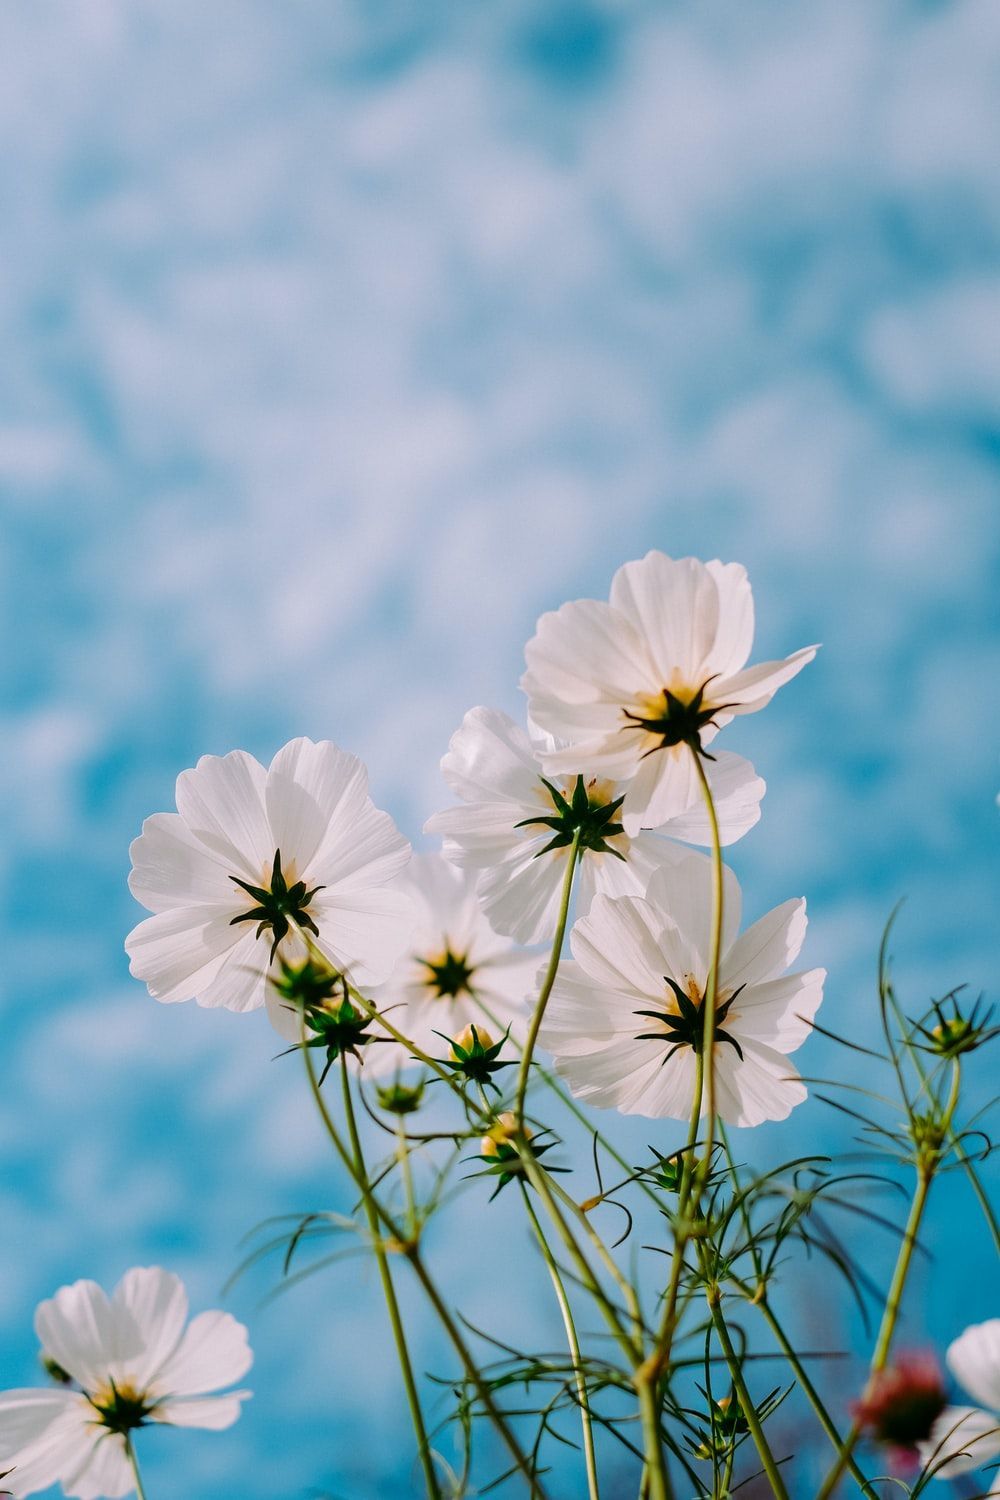 A close up of white flowers with a blue sky in the background - Spring